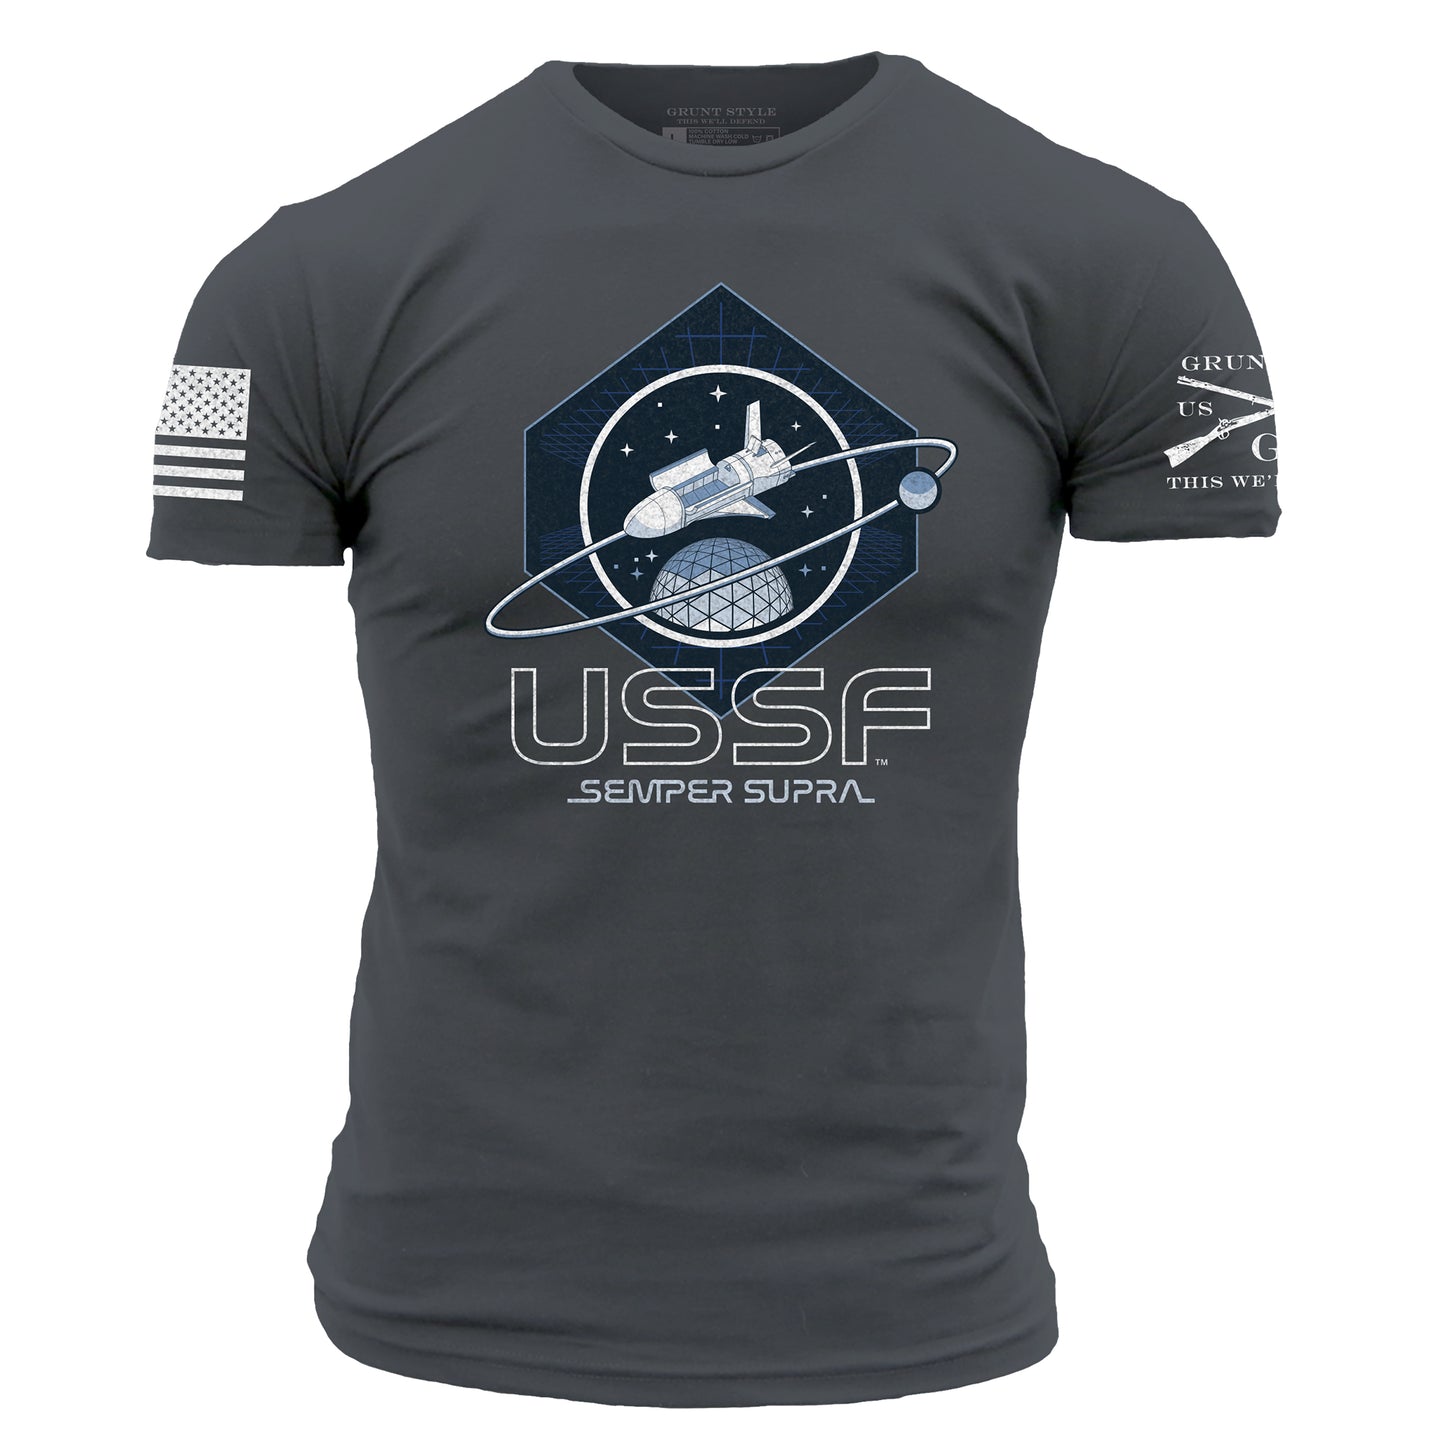 USSF - Space Operations T-Shirt